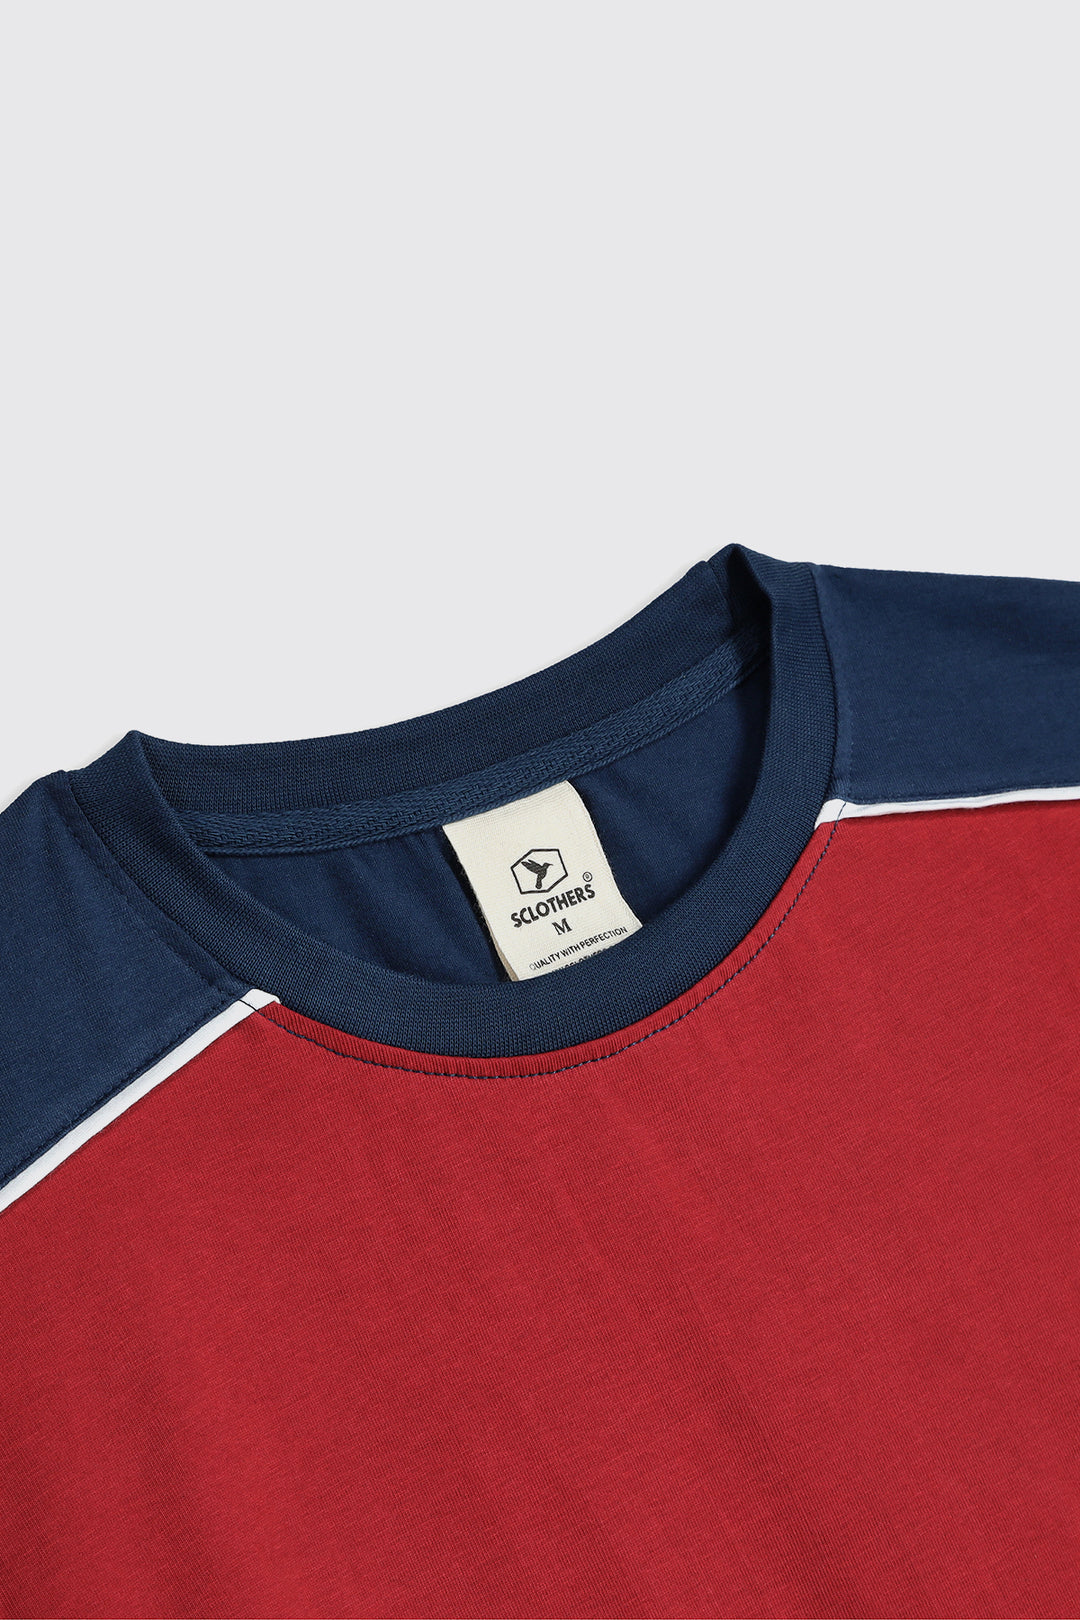 Red & Navy Blue Paneled Embroidered T-Shirt (Plus Size) - W23 - MT0279P